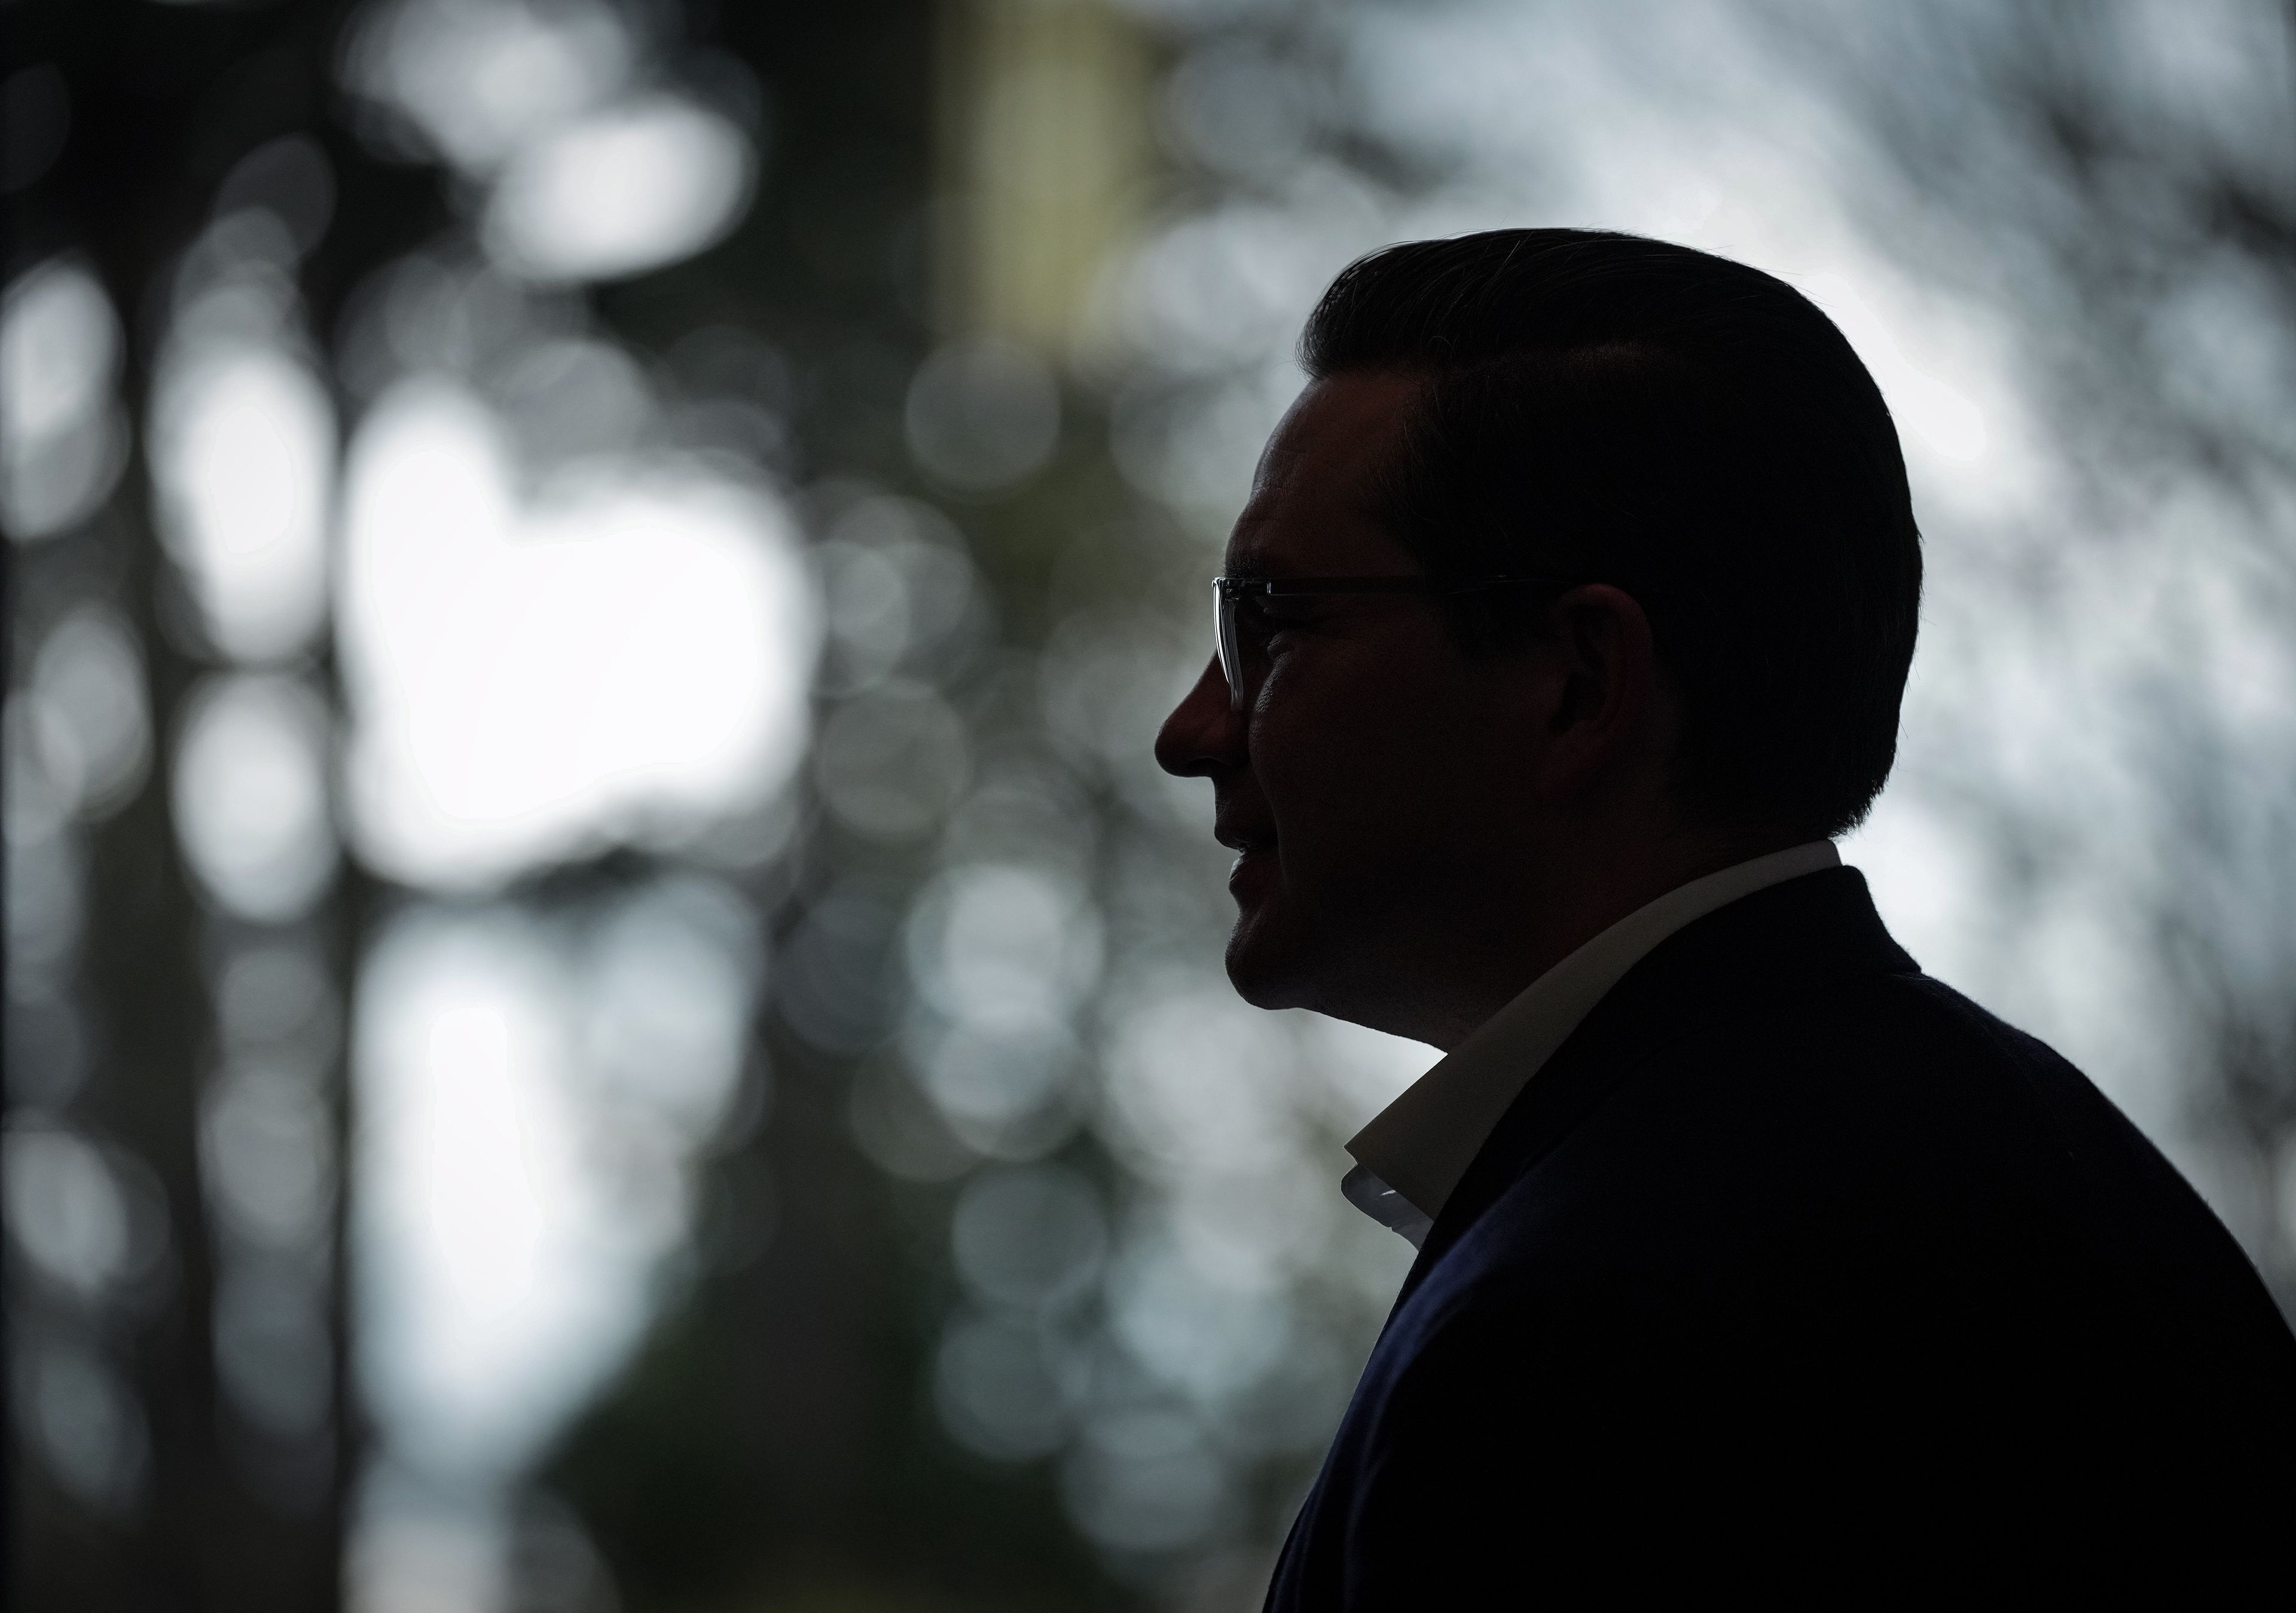 Poilievre is silhouetted during a meet and greet at the University of British Columbia, in Vancouver, April 7, 2022. (Darryl Dyck/The Canadian Press)